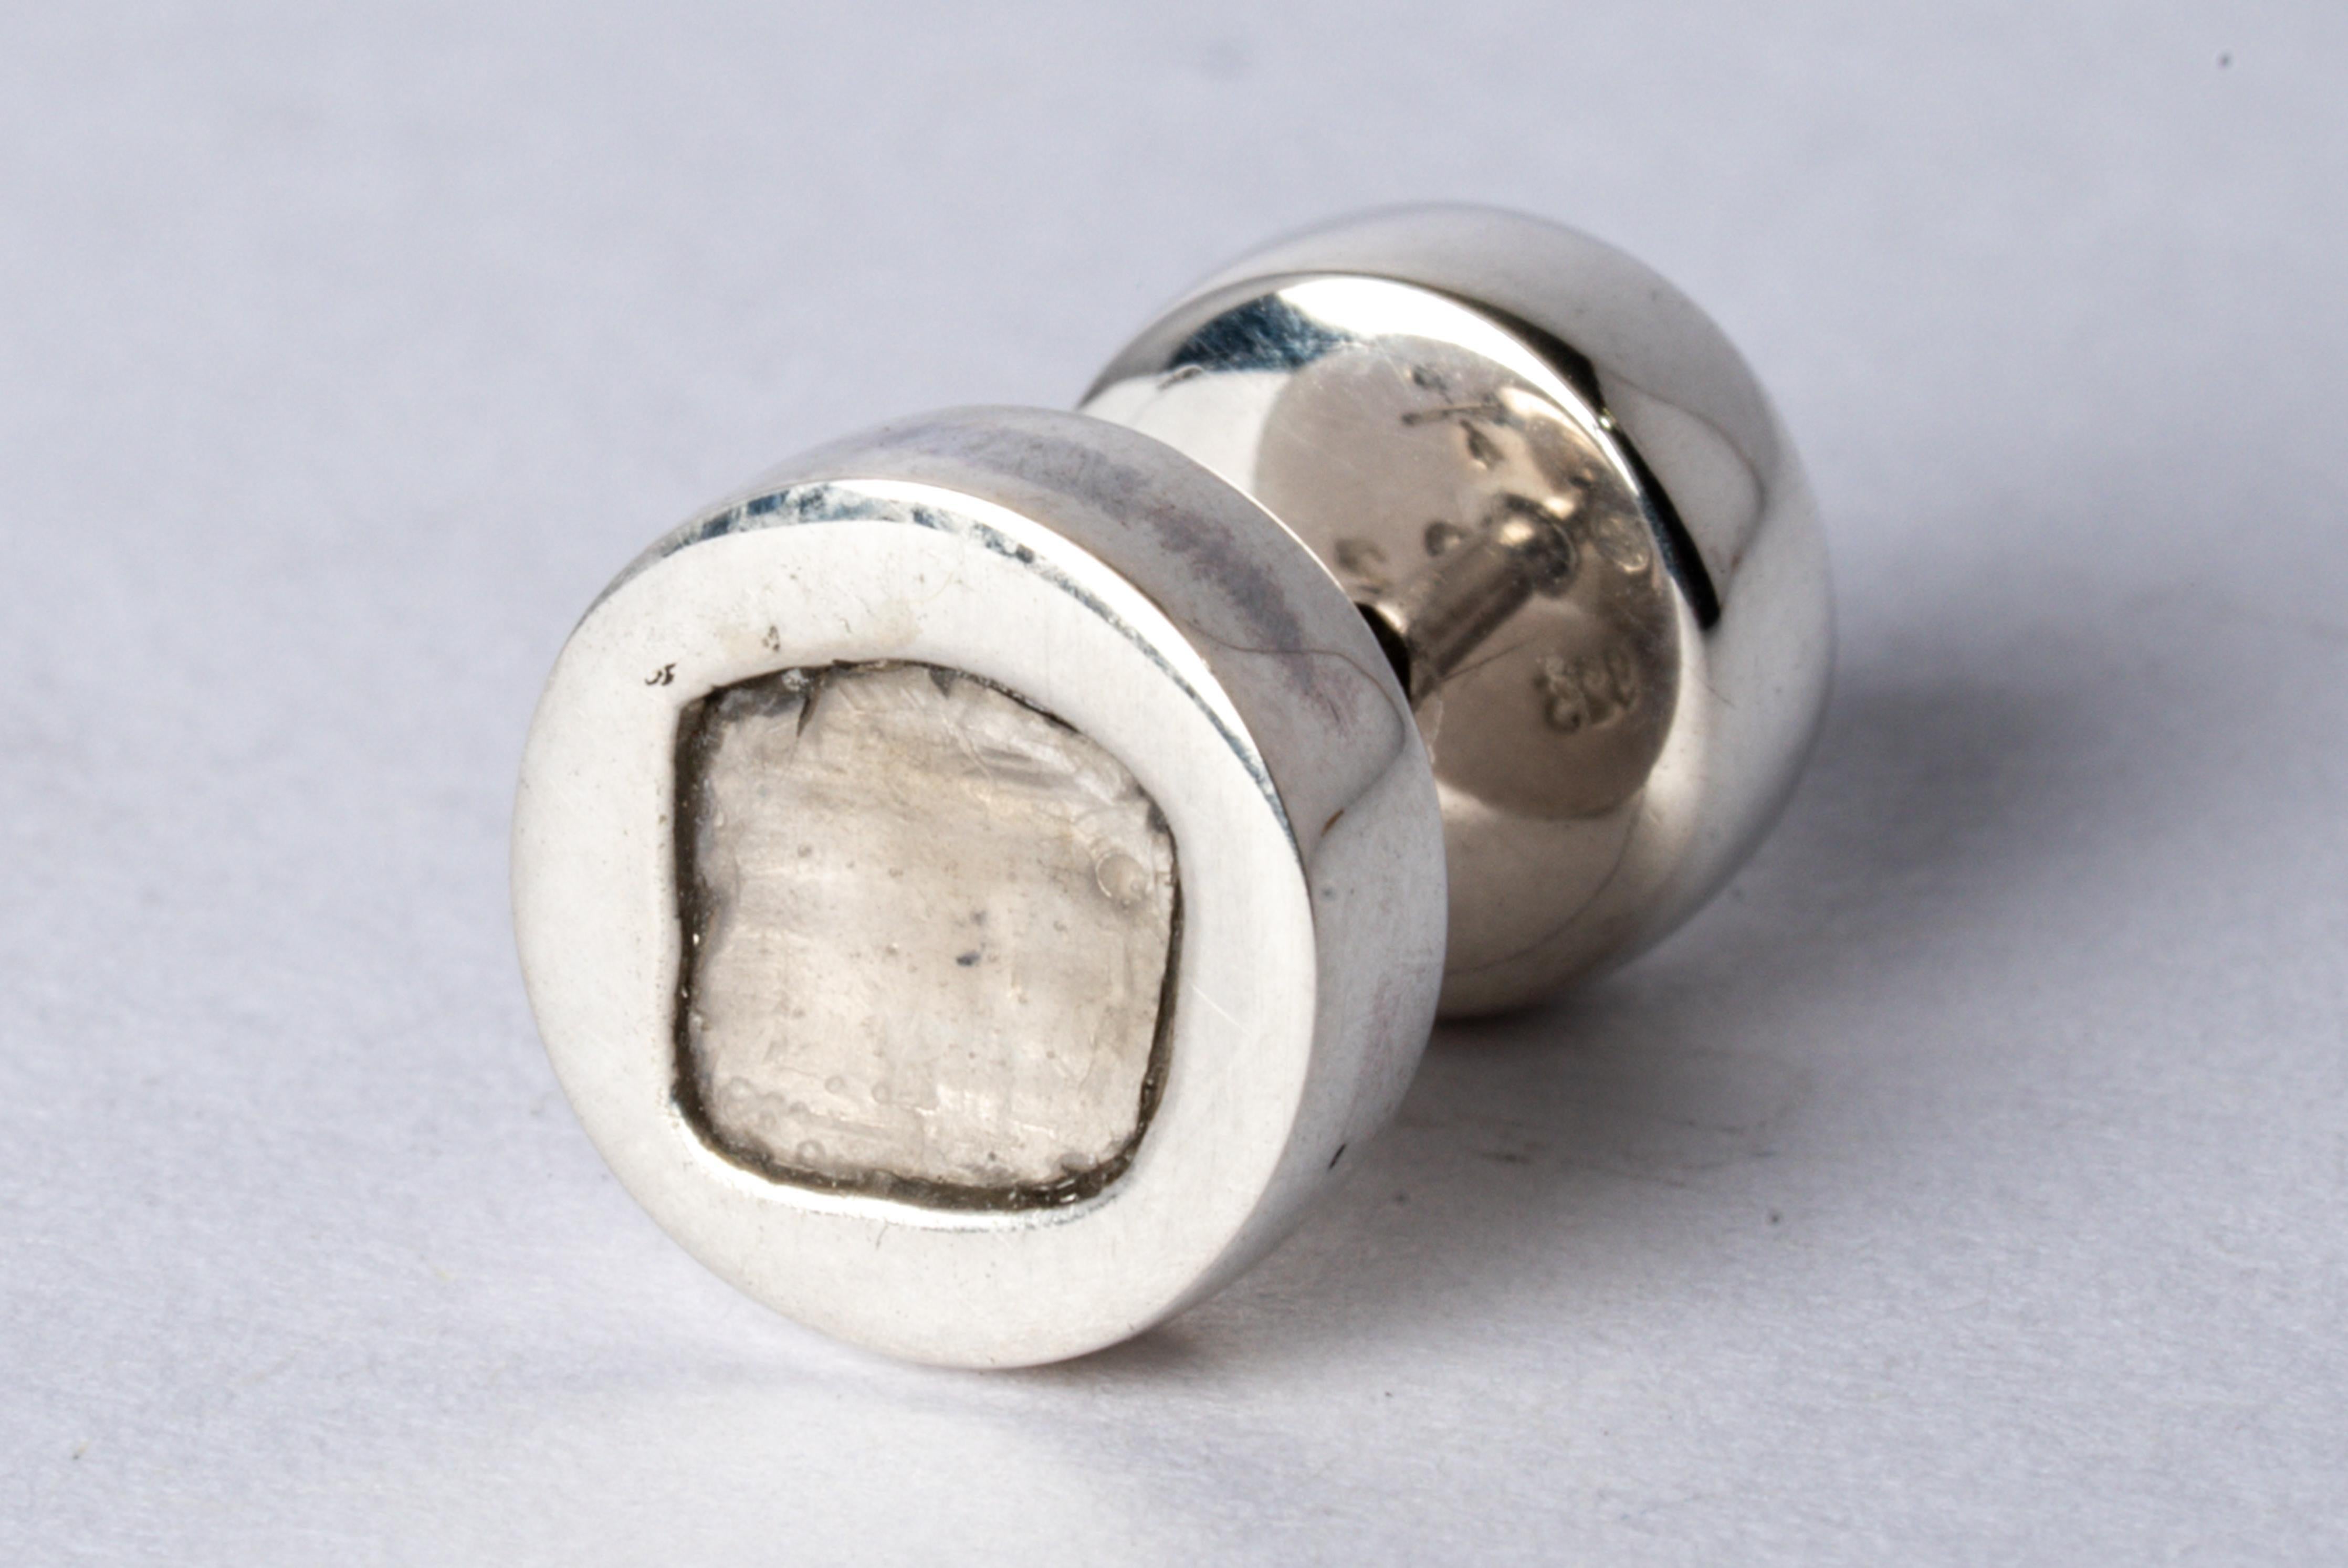 Stud earring in sterling silver and slabs of rough diamond. These slabs are removed from a larger chunk of diamond. This item is made with a naturally occurring element and will vary from the photograph you see. Each stone fragment and shape are